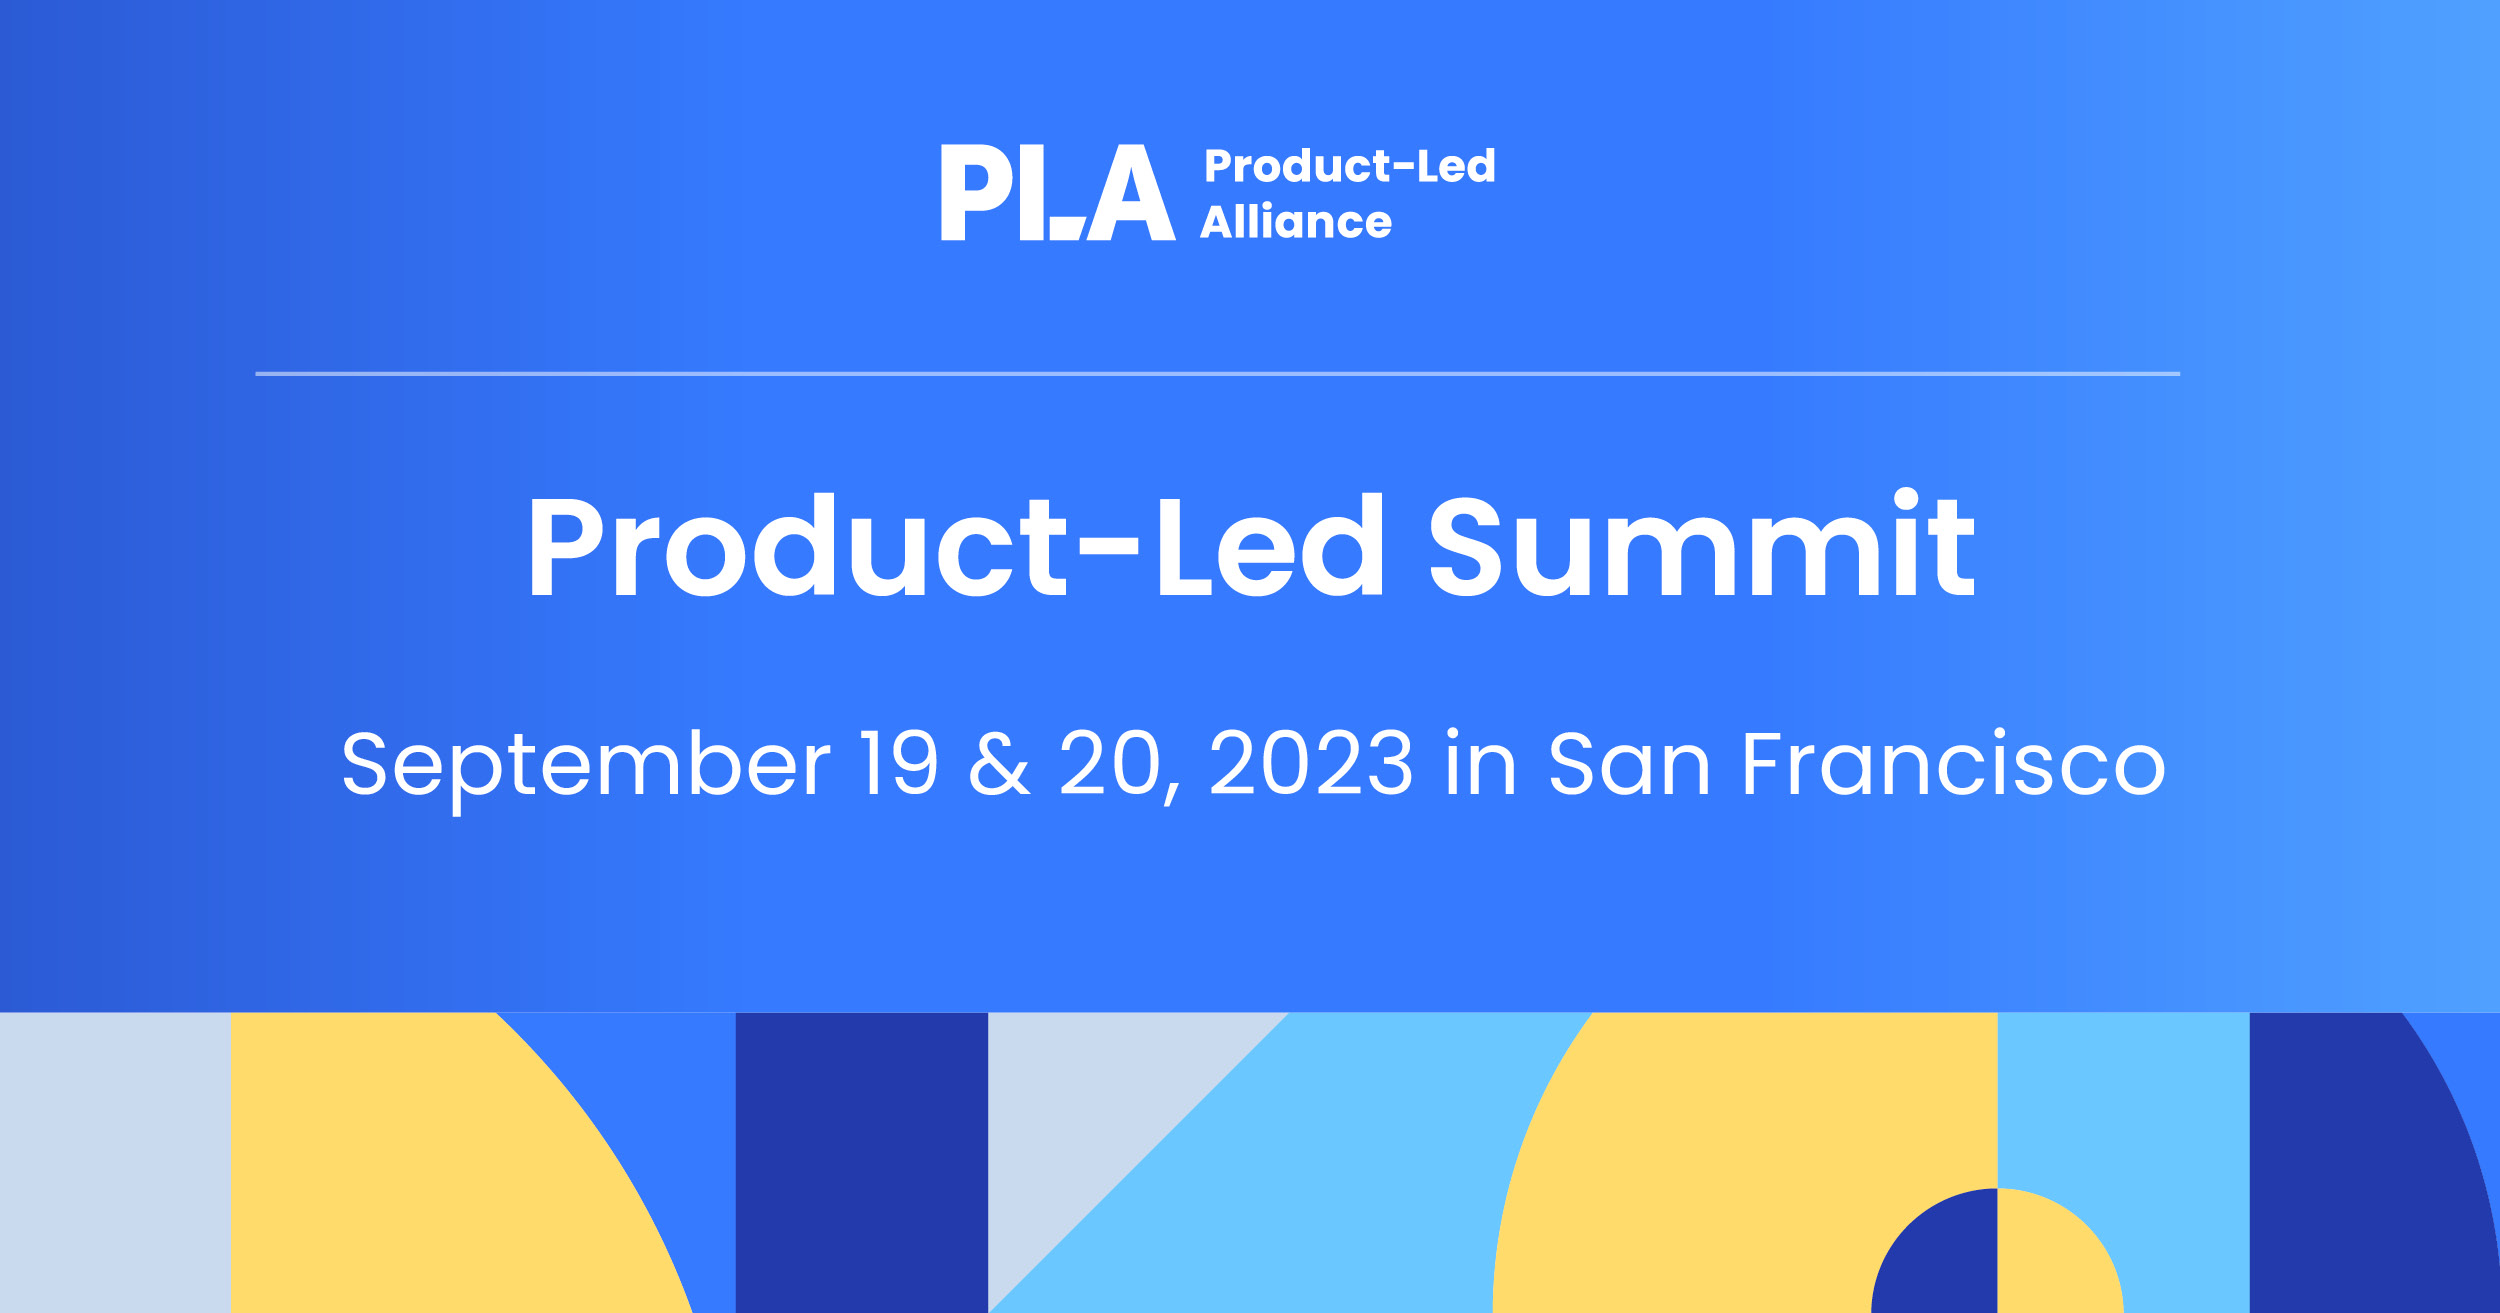 ProductLed Summit San Francisco 2023